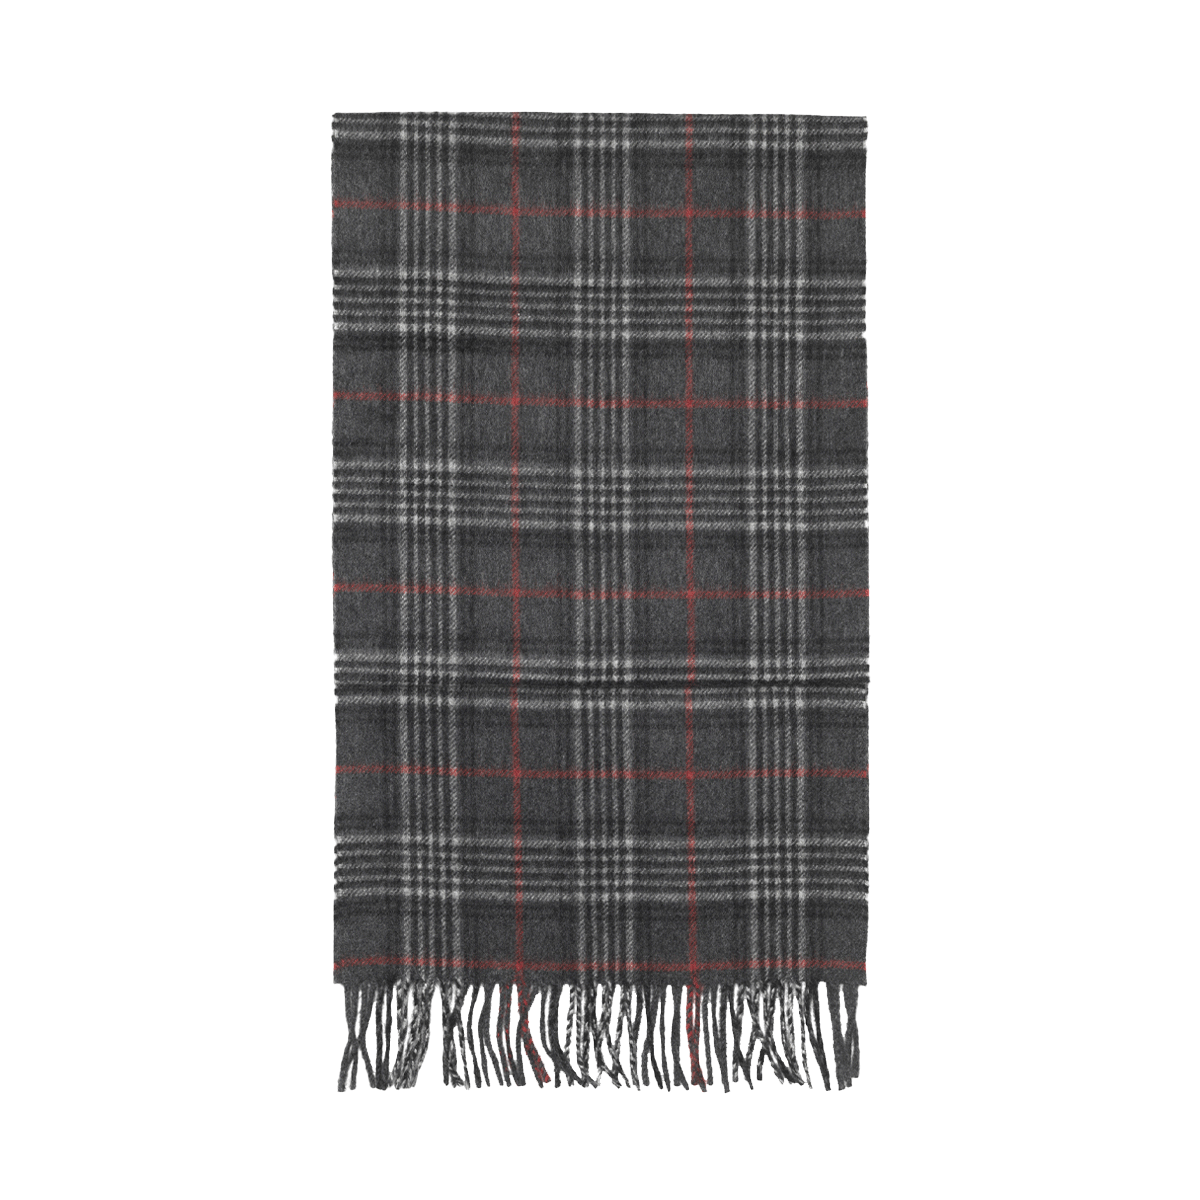 House Check Cashmere Scarf - Charcoal/Black/Red